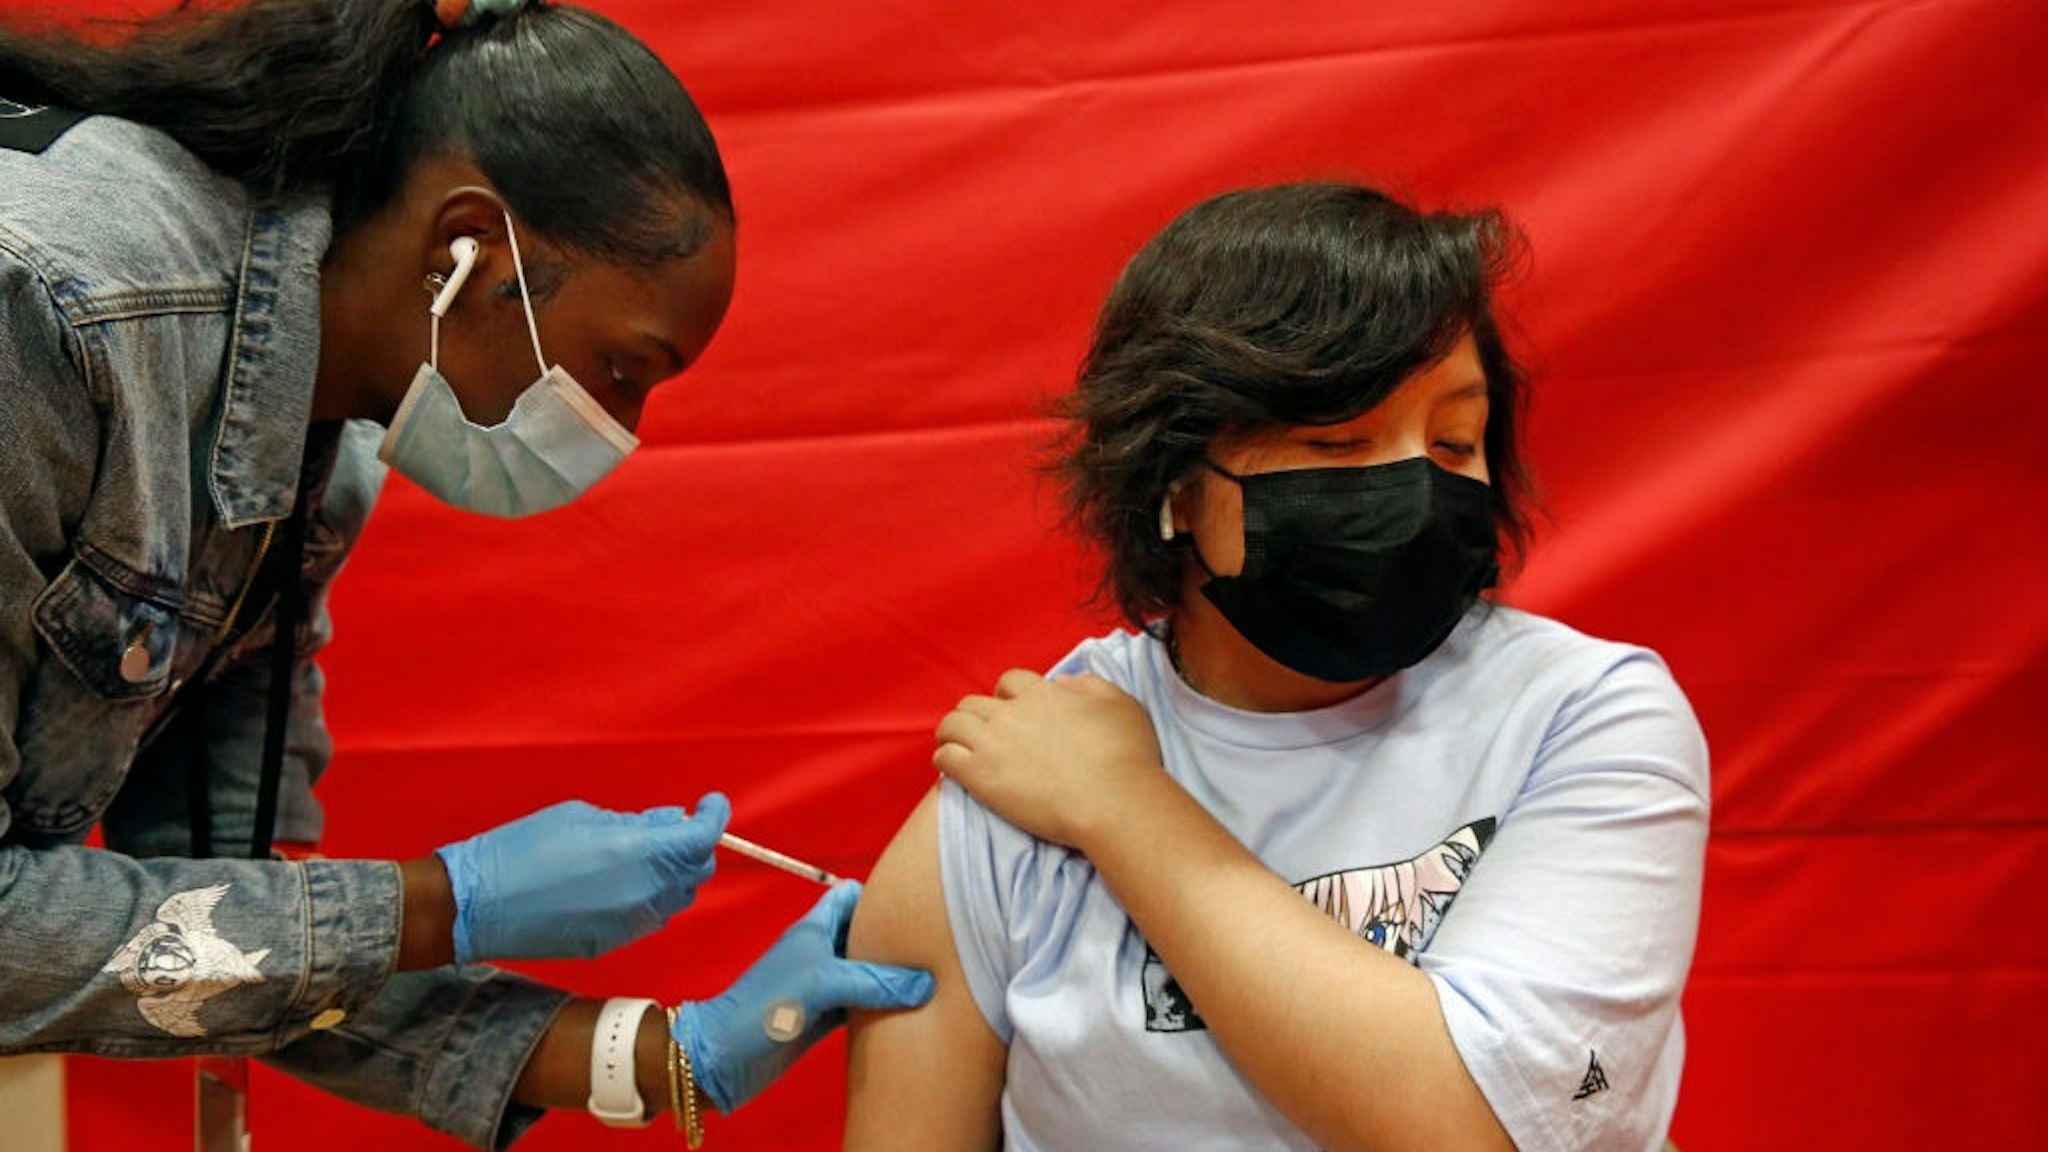 LOS ANGELES, CA - MAY 17: Alex Olvera, 15, is vaccinated with Pfizer by Rickeyva Foster, left, at the Manual Arts High School basketball and gym building in downtown on Monday, May 17, 2021 in Los Angeles, CA. The school is one of 200 sites that the Los Angeles Unified School District has deployed mobile vaccination teams to get as many shots into students arms as possible.